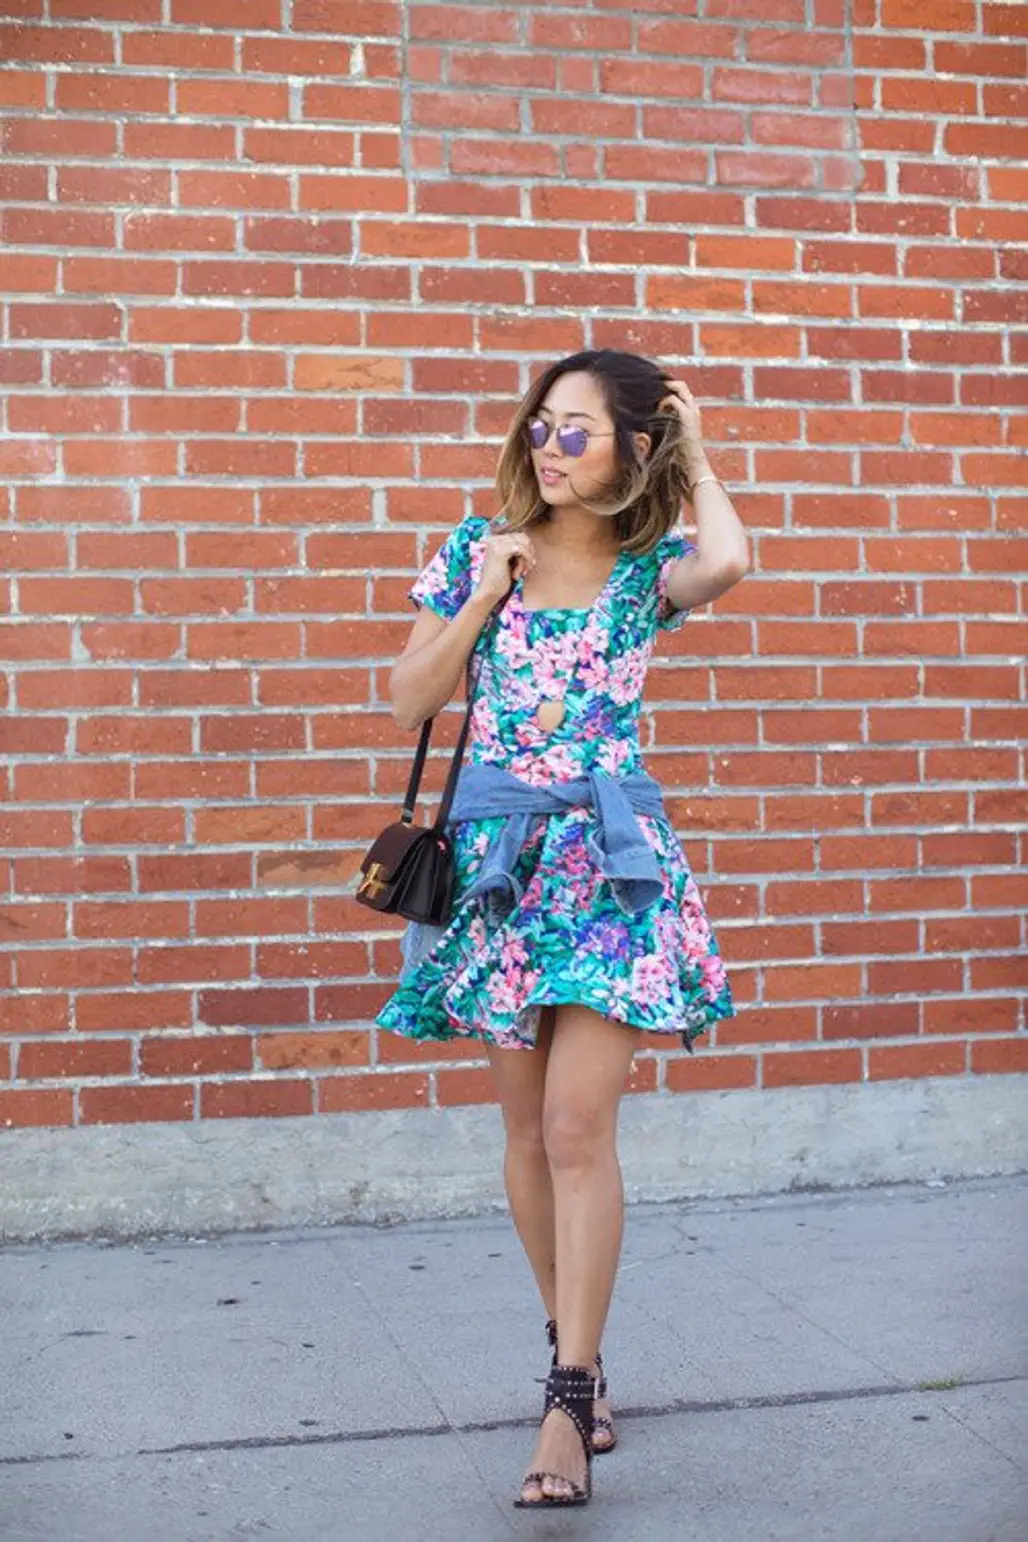 With a Floral Dress